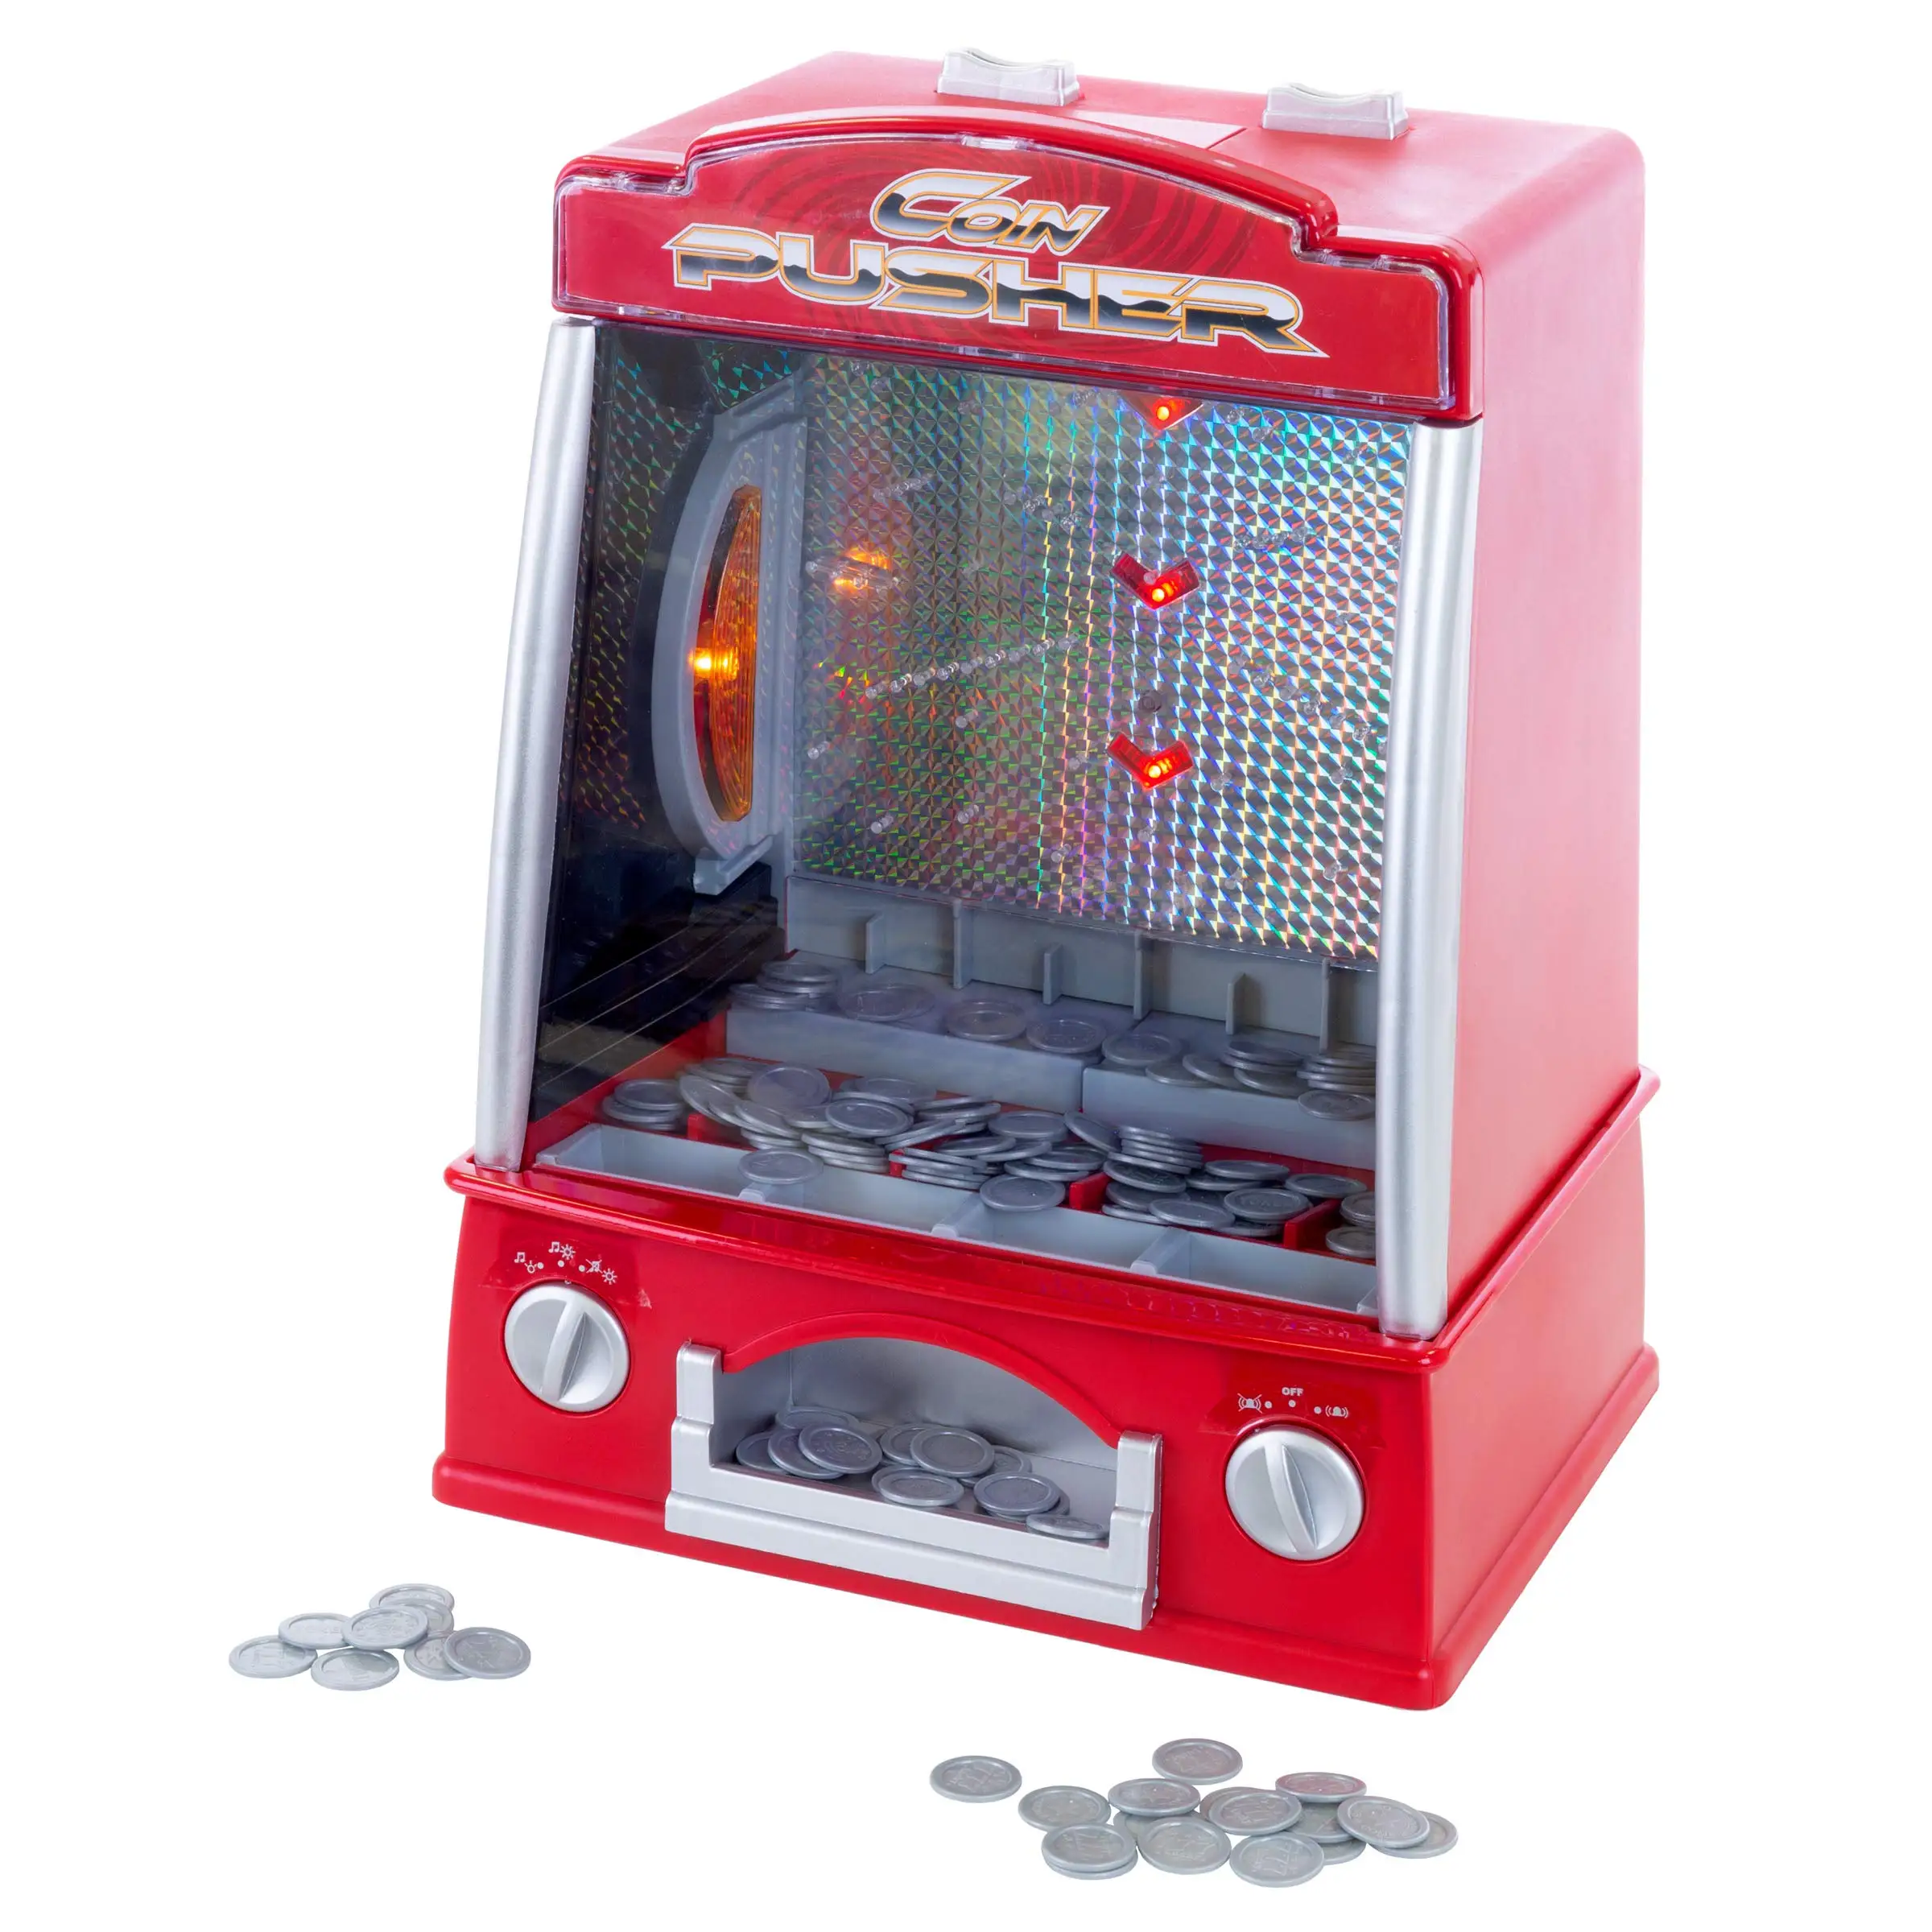 Coin Pusher Miniature Arcade Game - Replica Classic Penny & Dime Dozer Table Or bar Top Prize Vending Machine for Kids & Adults